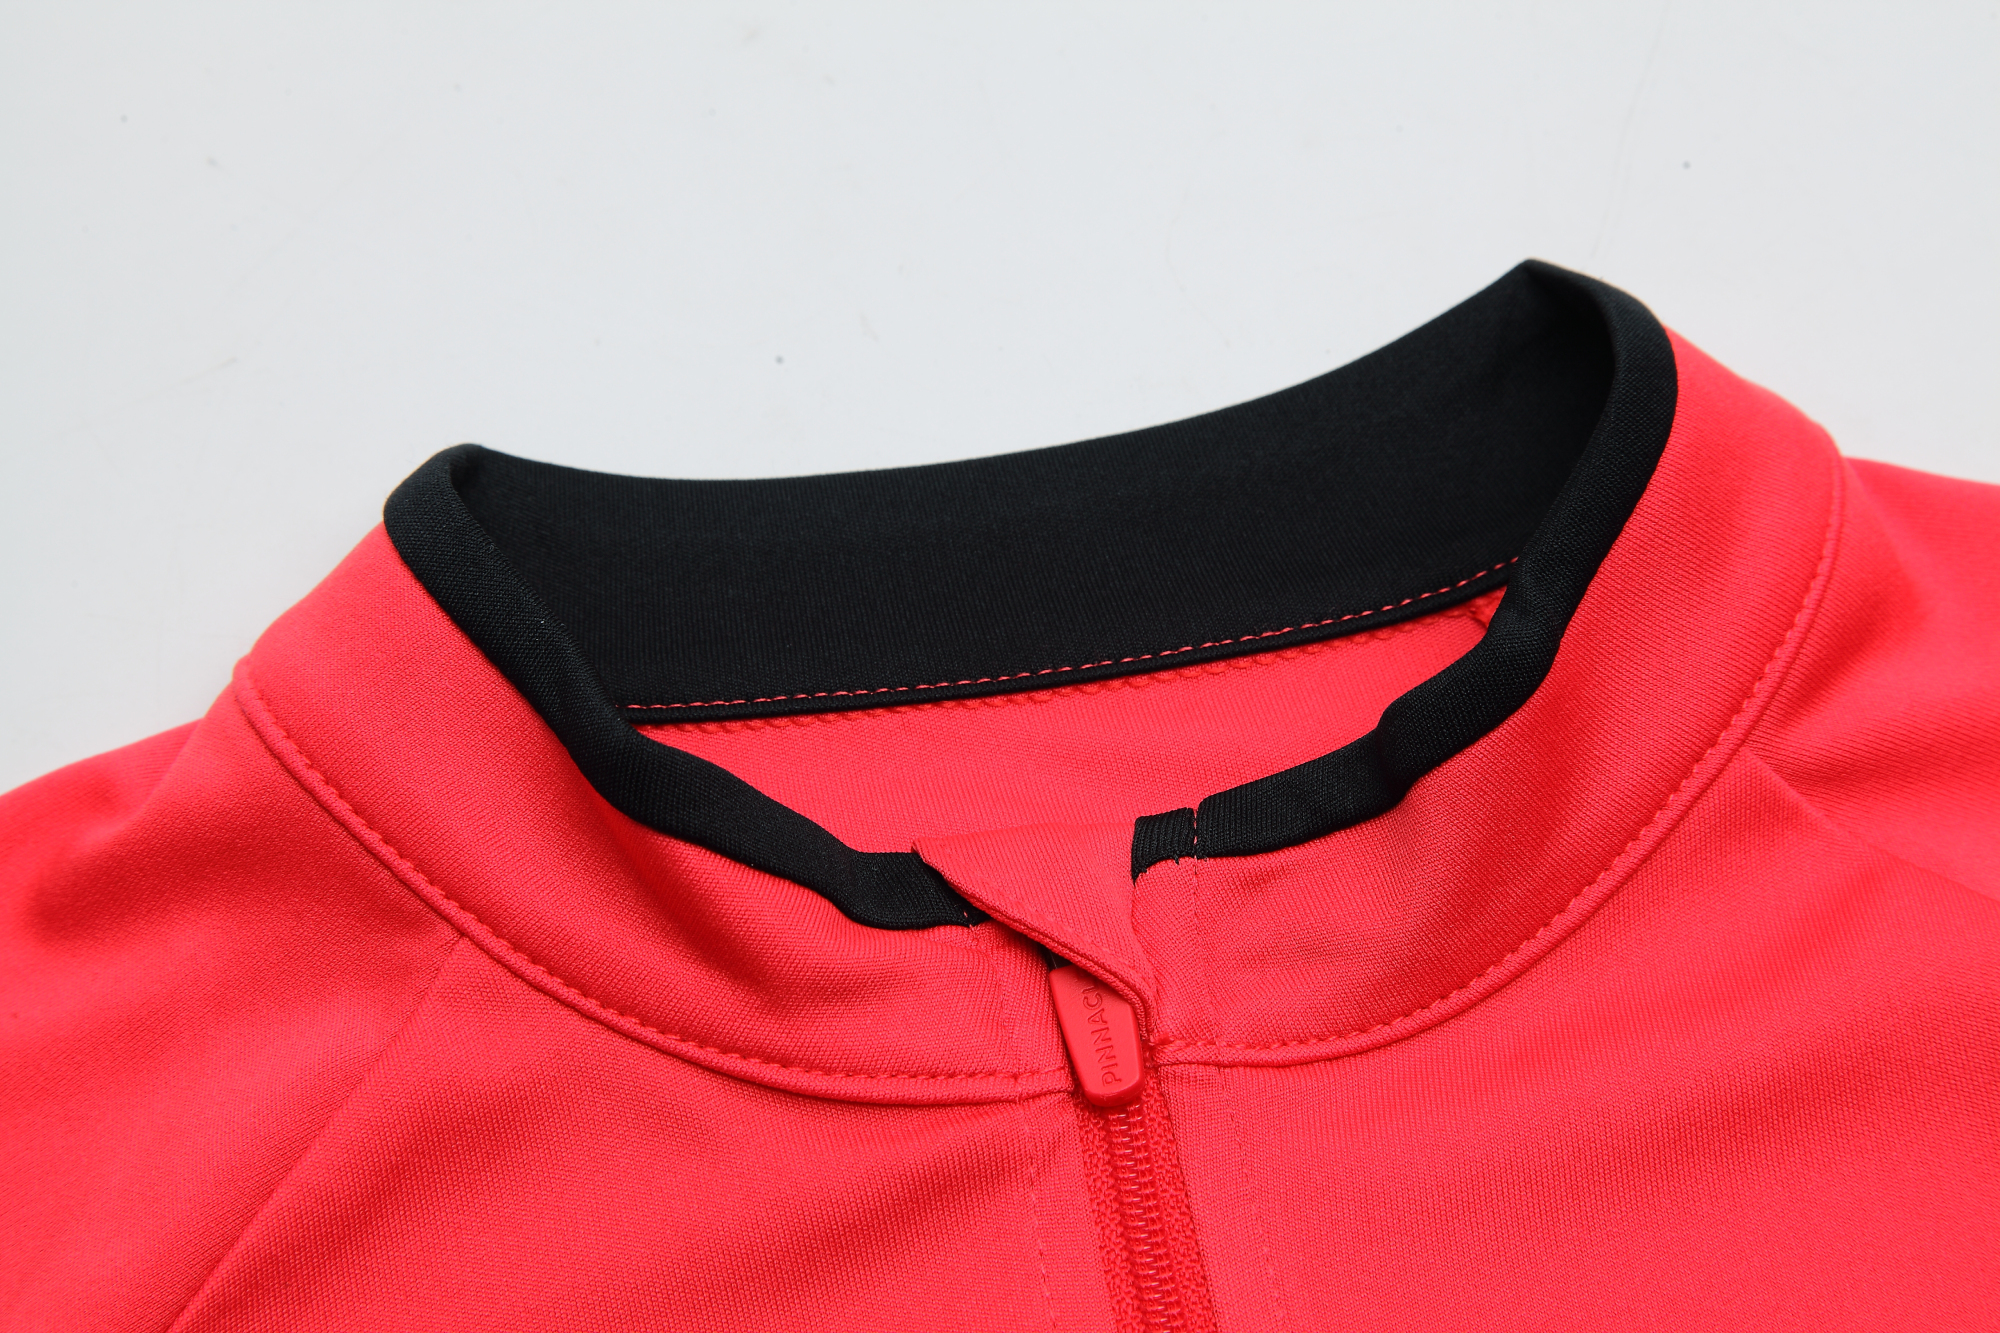 Women’s knitted cycling S/S Jersey.